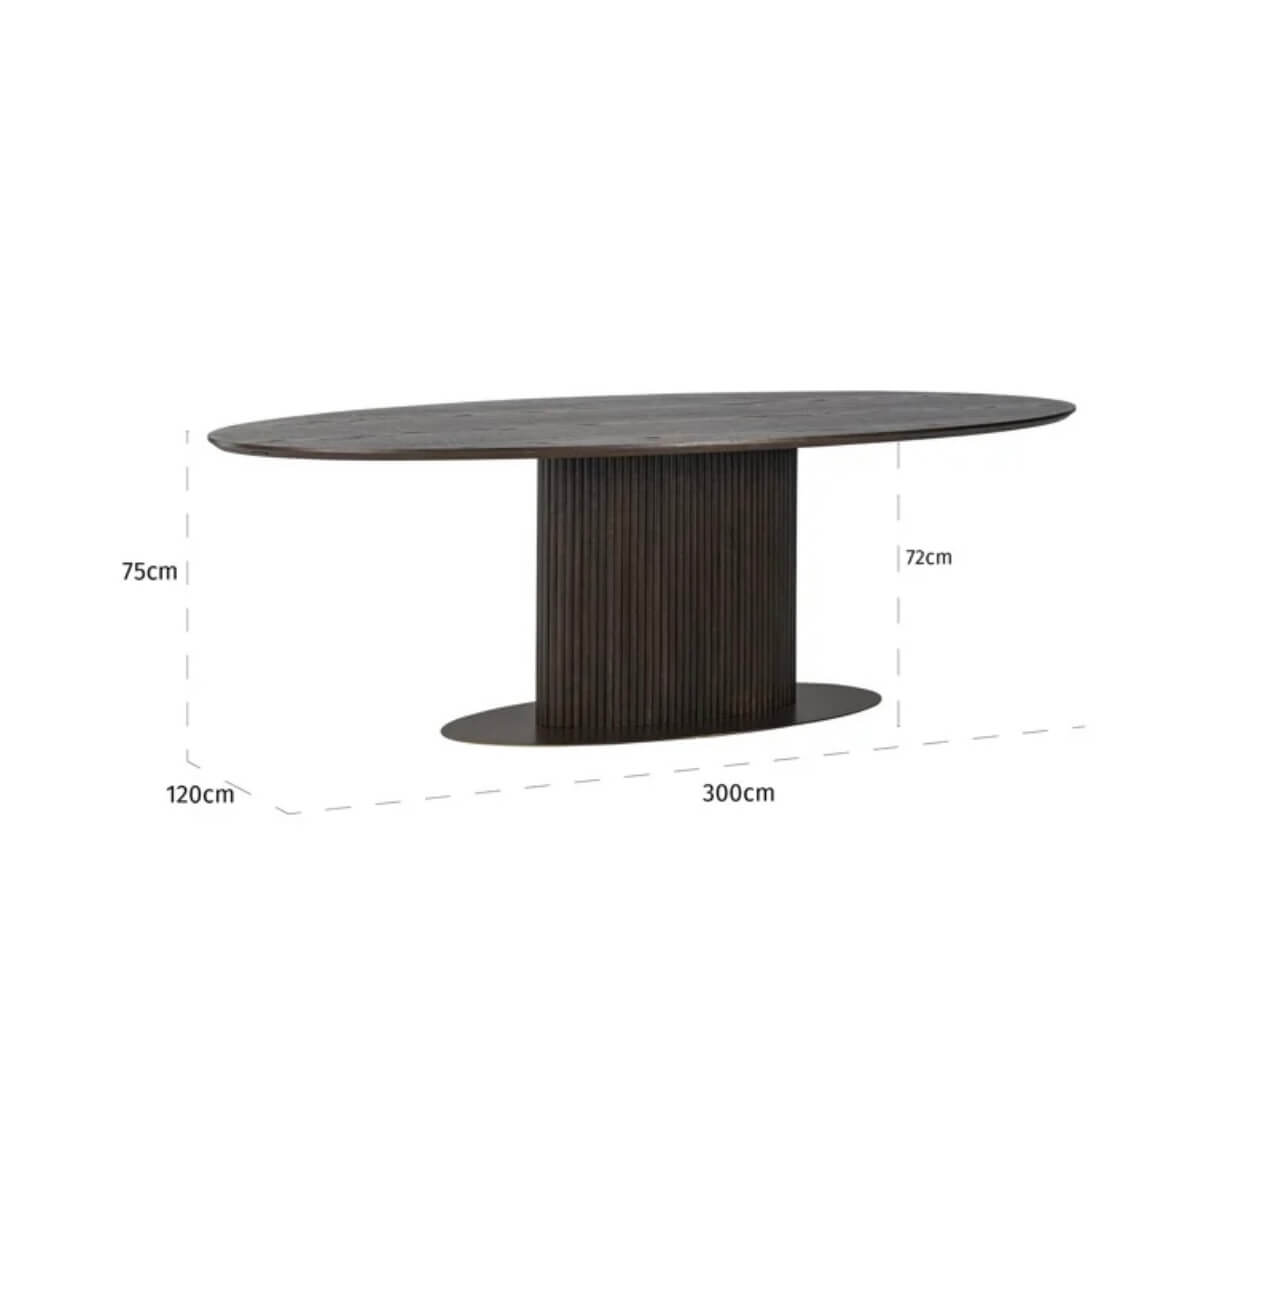 Luxor Oval Dining Table 3m